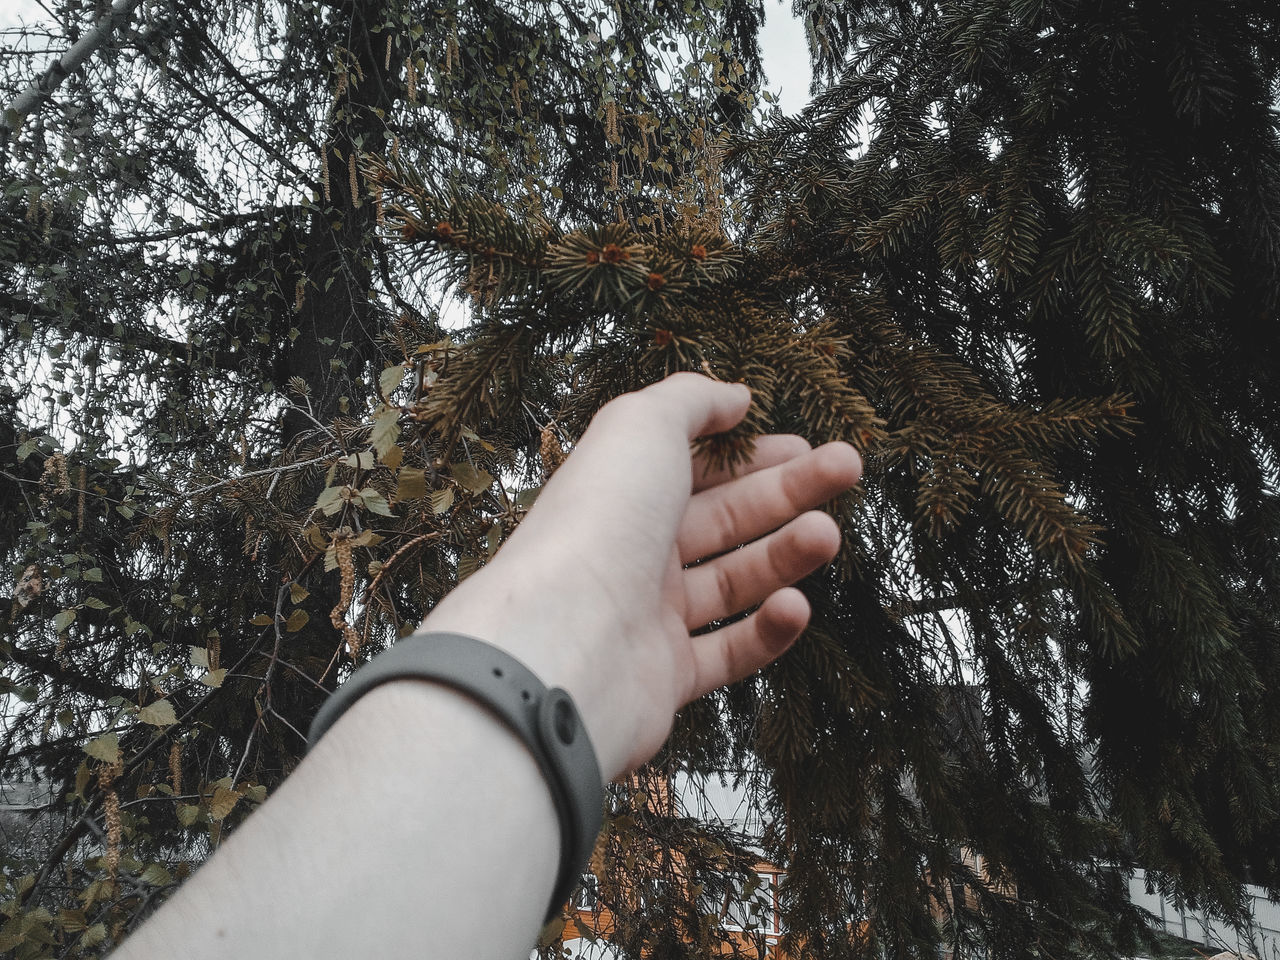 LOW ANGLE VIEW OF HAND AGAINST TREES AND PLANTS